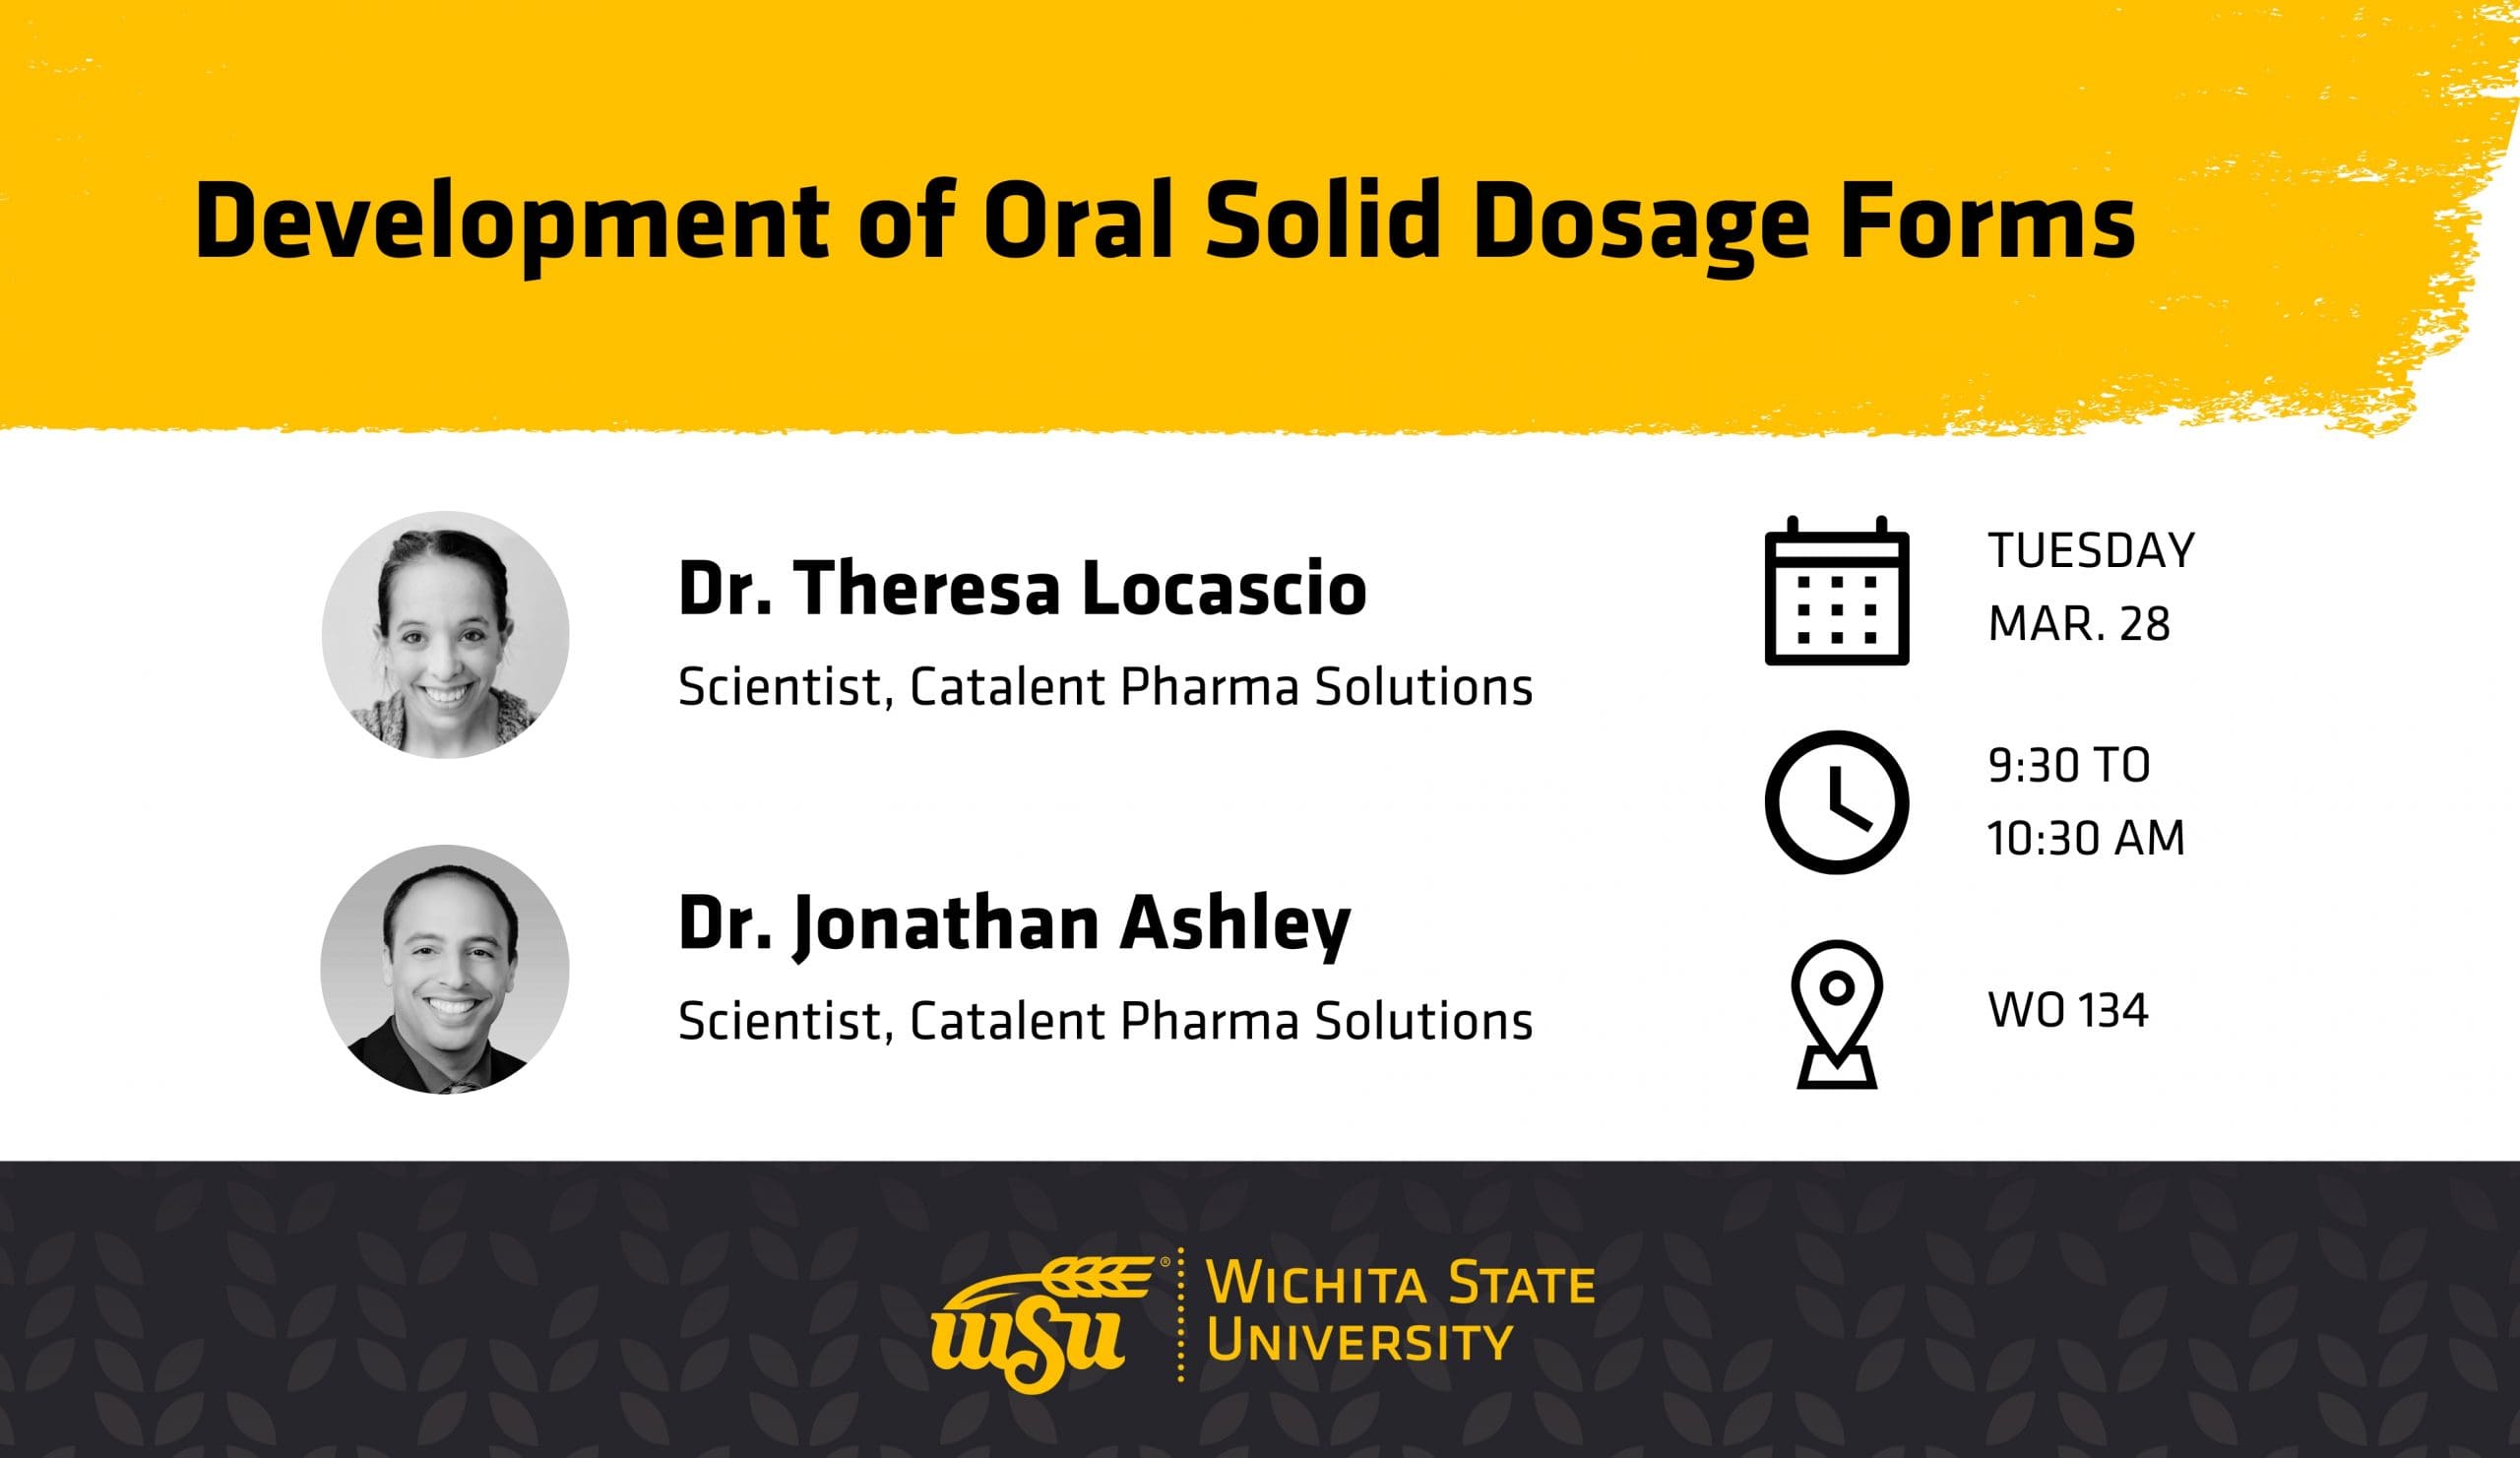 Graphic with photos of Dr. Theresa Locascio and Dr. Jonathan Ashley and the text, "Development of Oral Solid Dosage Forms | Dr. Theresa Locascio and Dr. Jonathan Ashley, Scientists from Catalent Pharma Solutions | From 9:30 to 10:30 a.m. Tuesday, Mar. 28 in 134 Woolsey Hall."